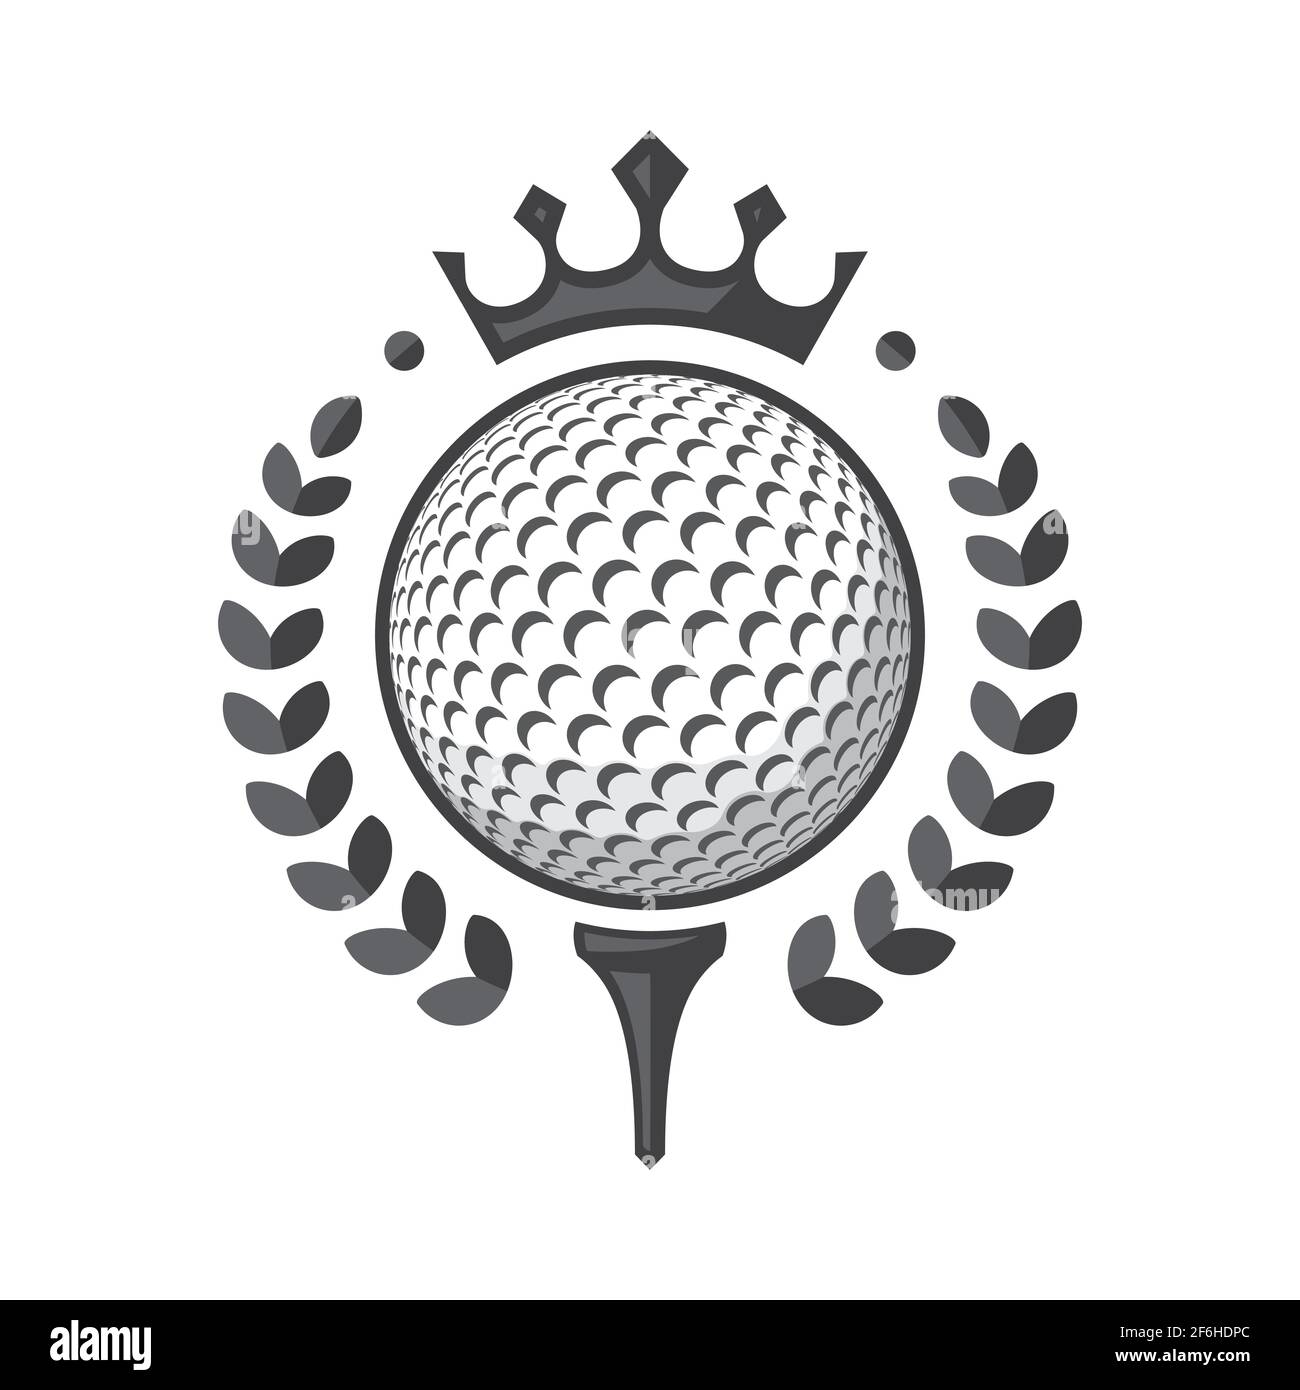 Golf club logo. Golf ball on tee with wreath and crown. Vector illustration, isolated on a white background Stock Vector